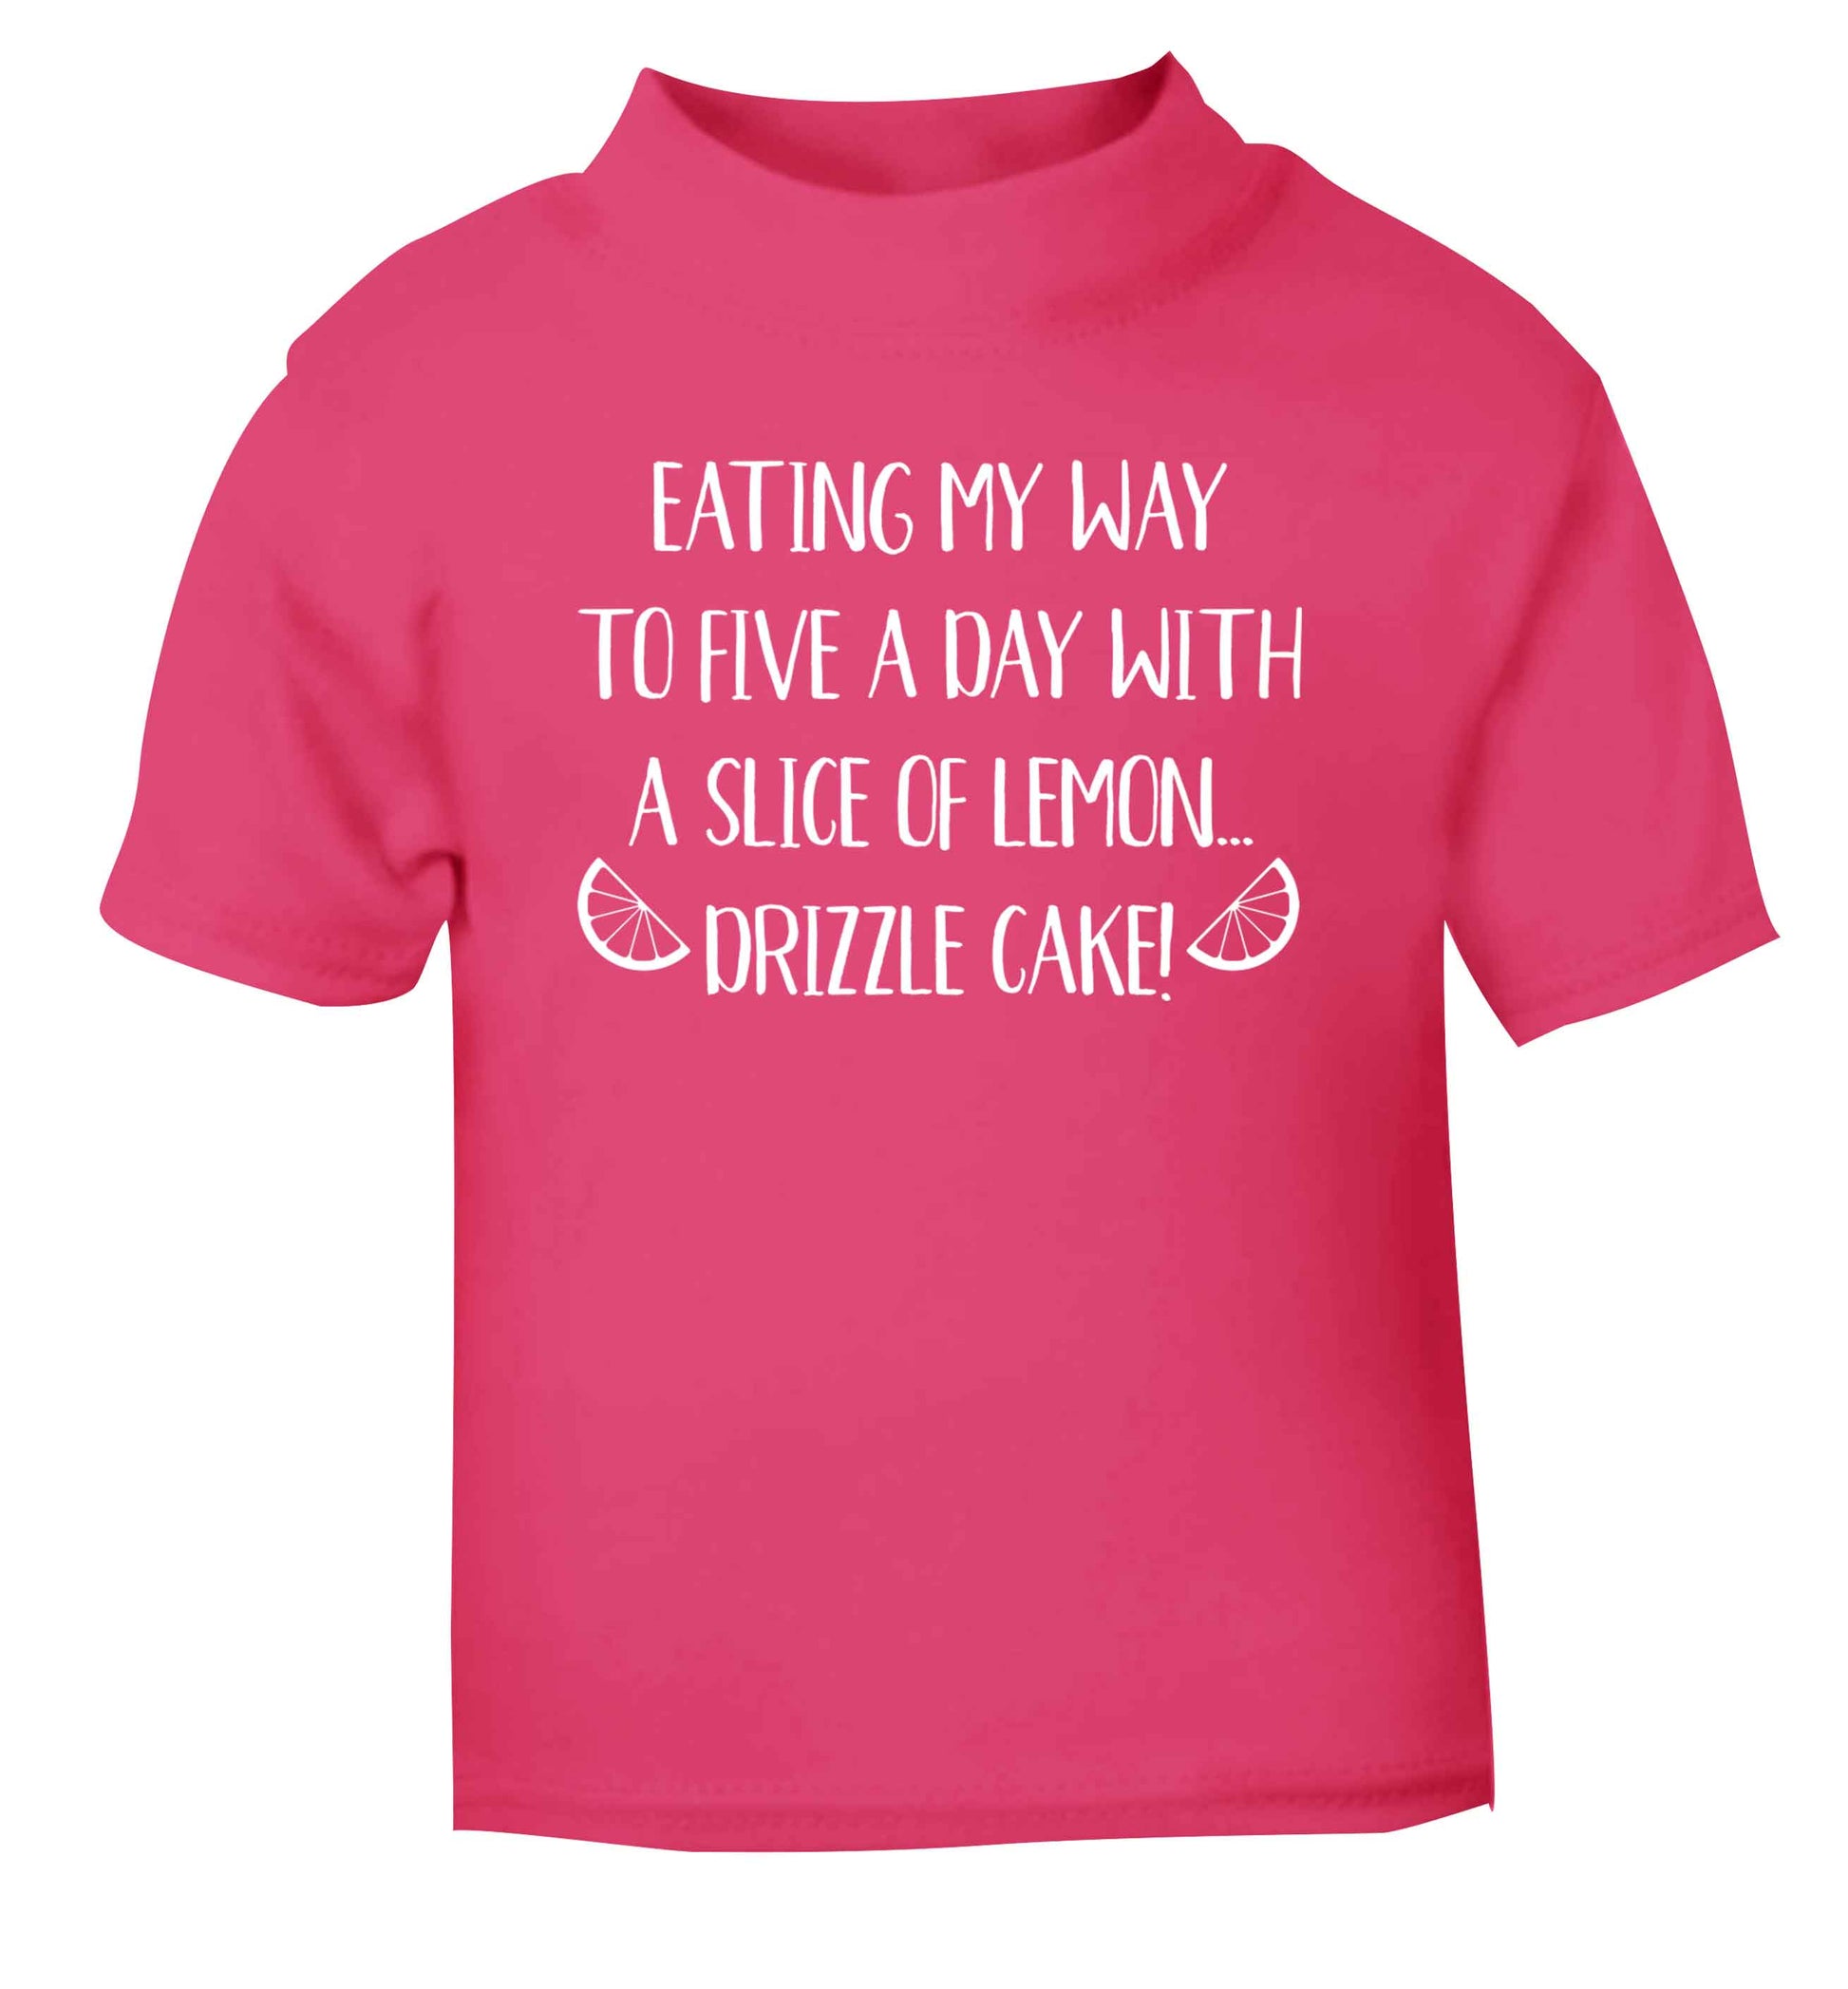 Eating my way to five a day with a slice of lemon drizzle cake day pink Baby Toddler Tshirt 2 Years